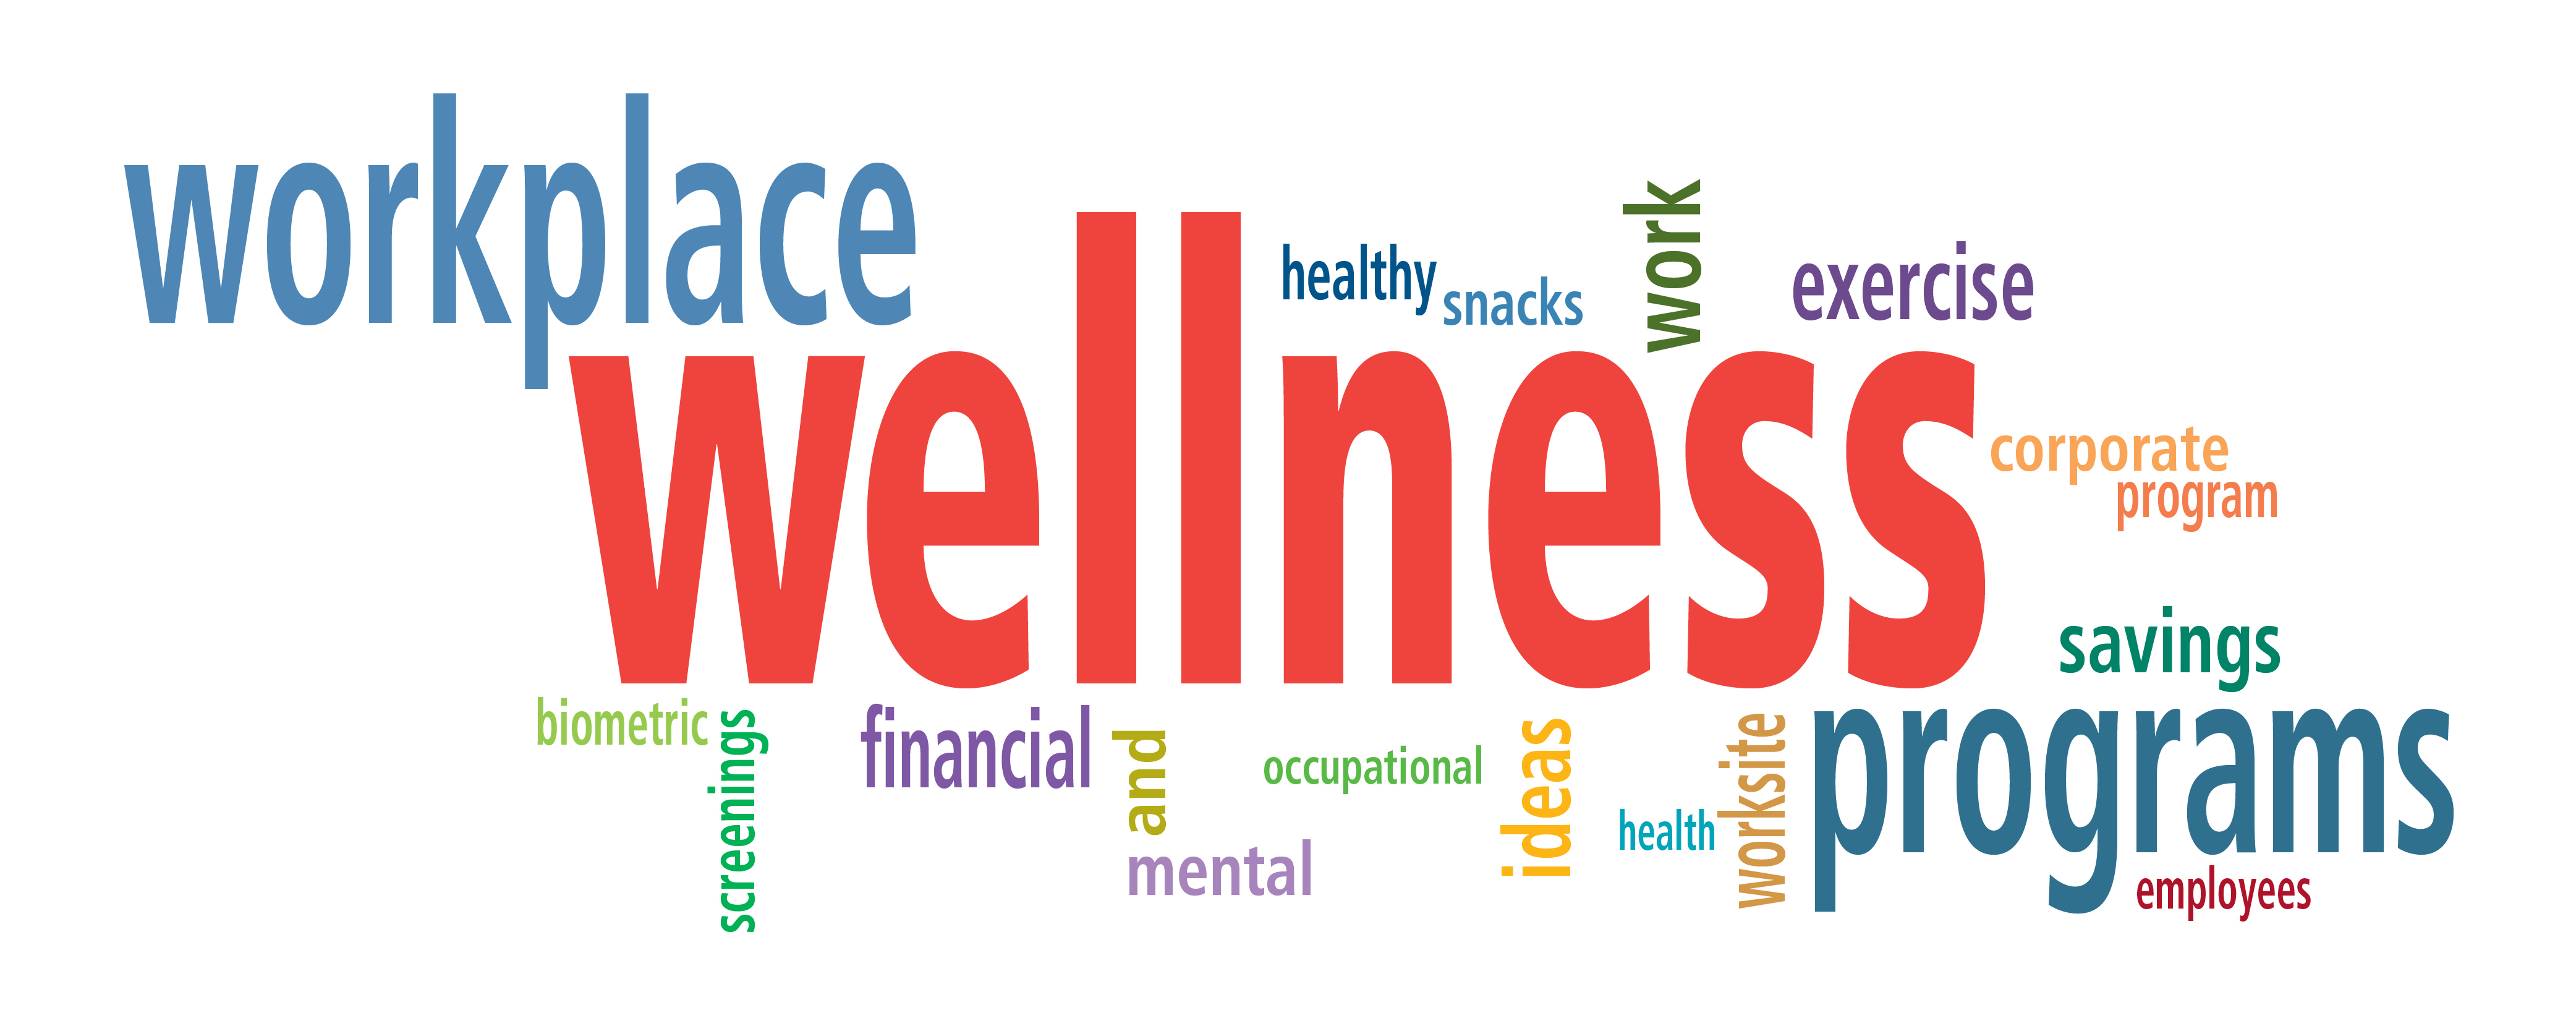 What Are the Benefits of Workplace Wellness Programs?